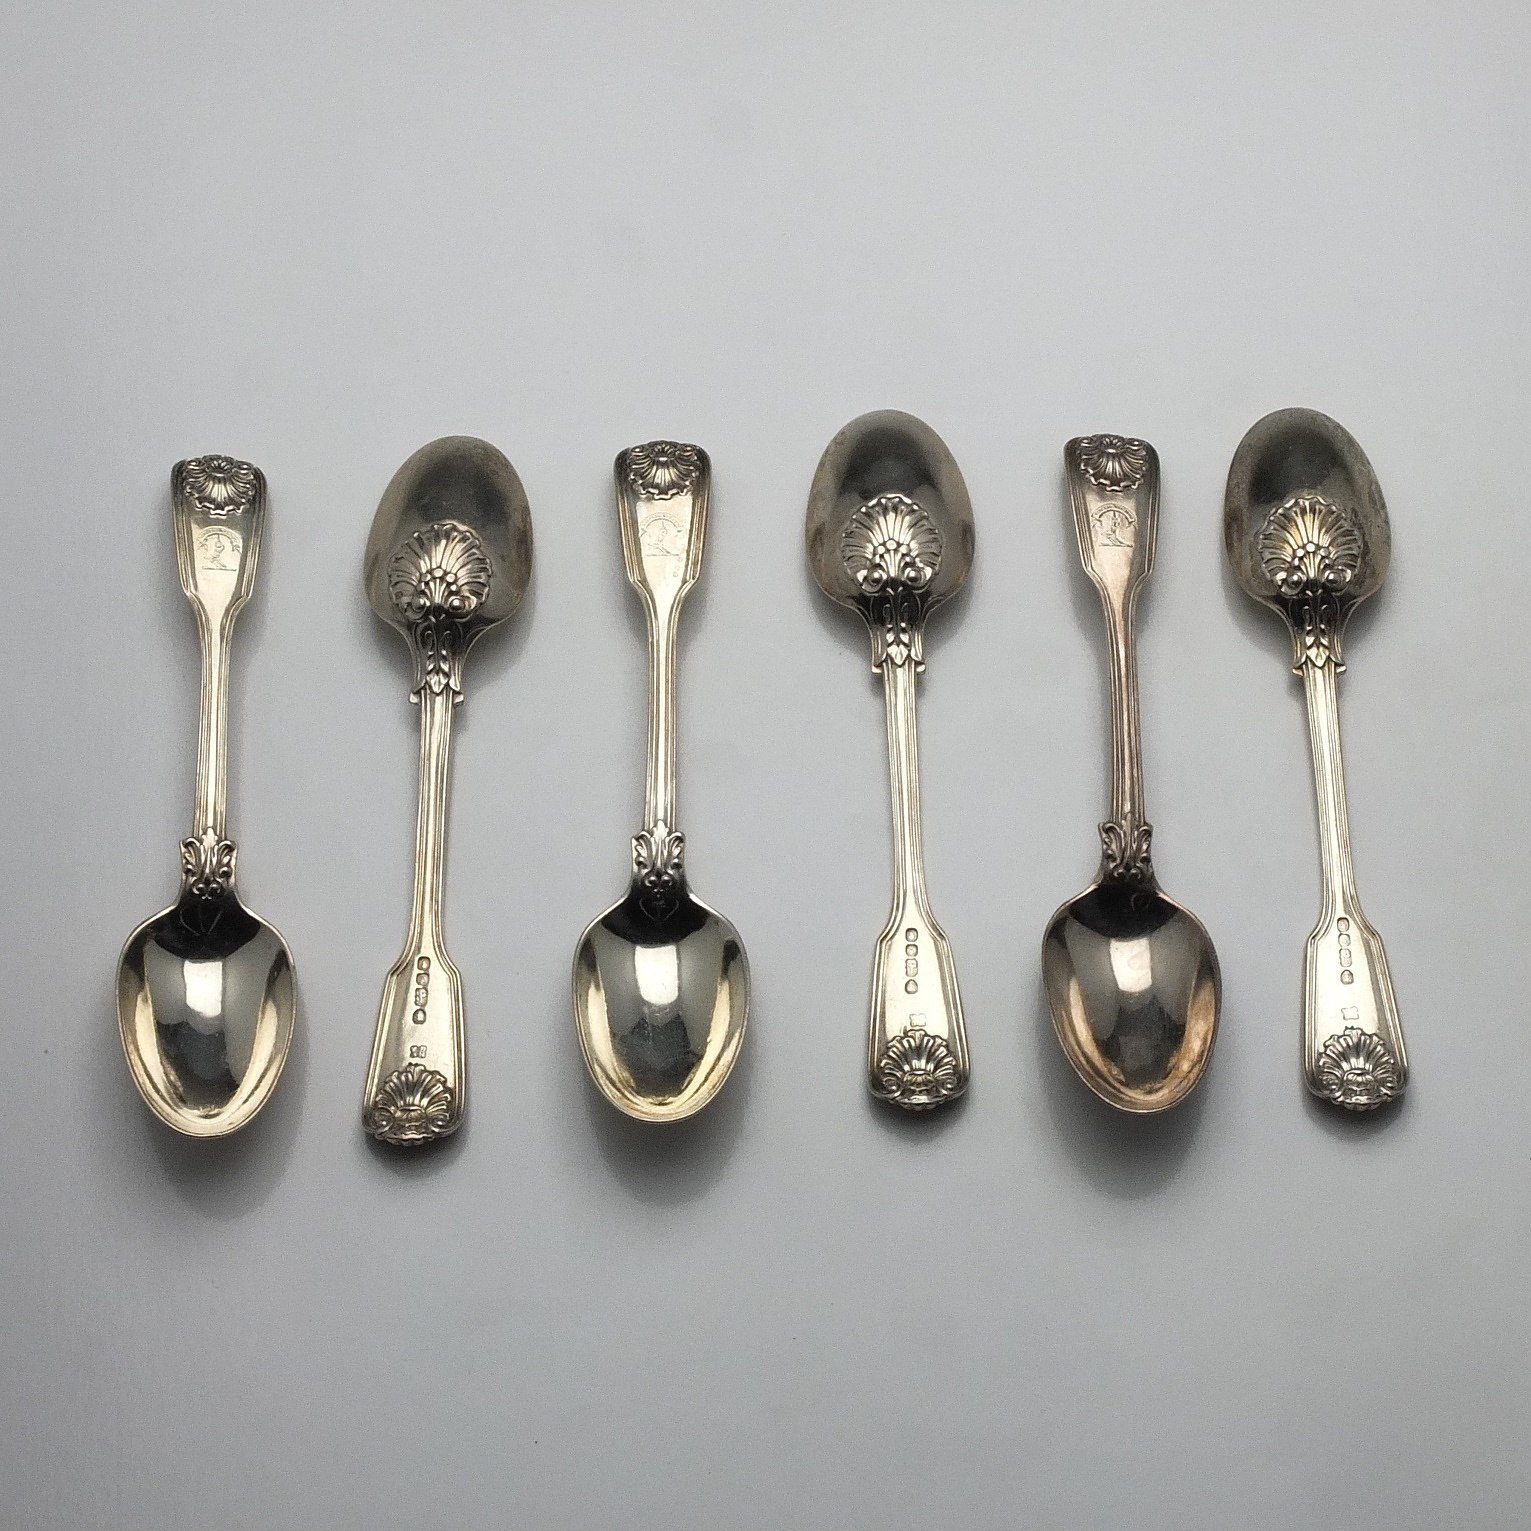 'Six Victorian Crested Sterling Silver Teaspoons Mary Chawner & George W Adams London 1838'